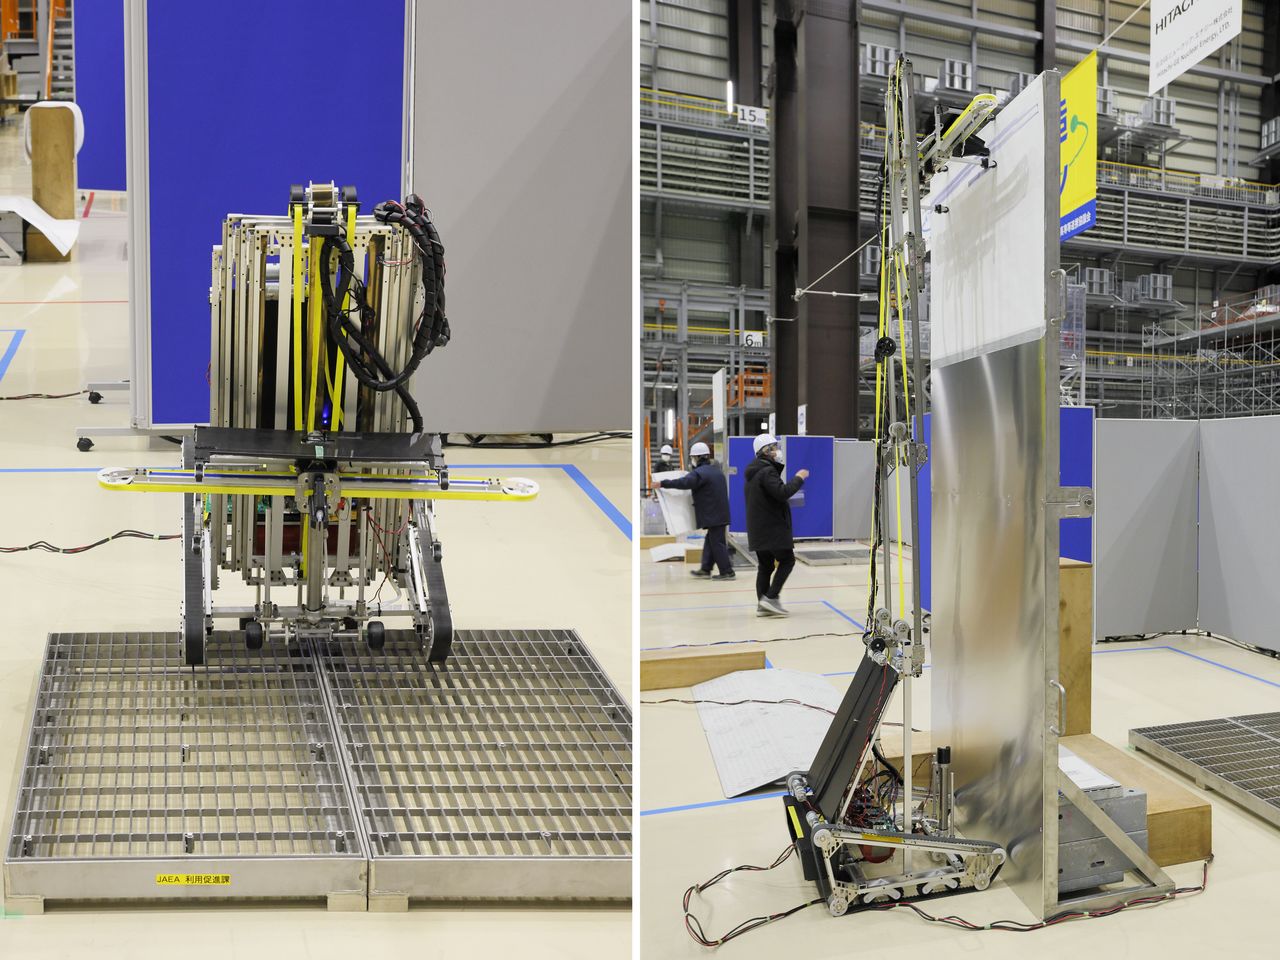 Left: The robot of the National Institute of Technology, Maizuru College (Kyoto) team clears the grating obstacle on a test run. Right: A robot that has reached the decontamination area extends its ladder-like arm to raise a pen used to color in a piece of imitation vellum in a way that is similar to actual surface decontamination work. (© Yamada Shinji)